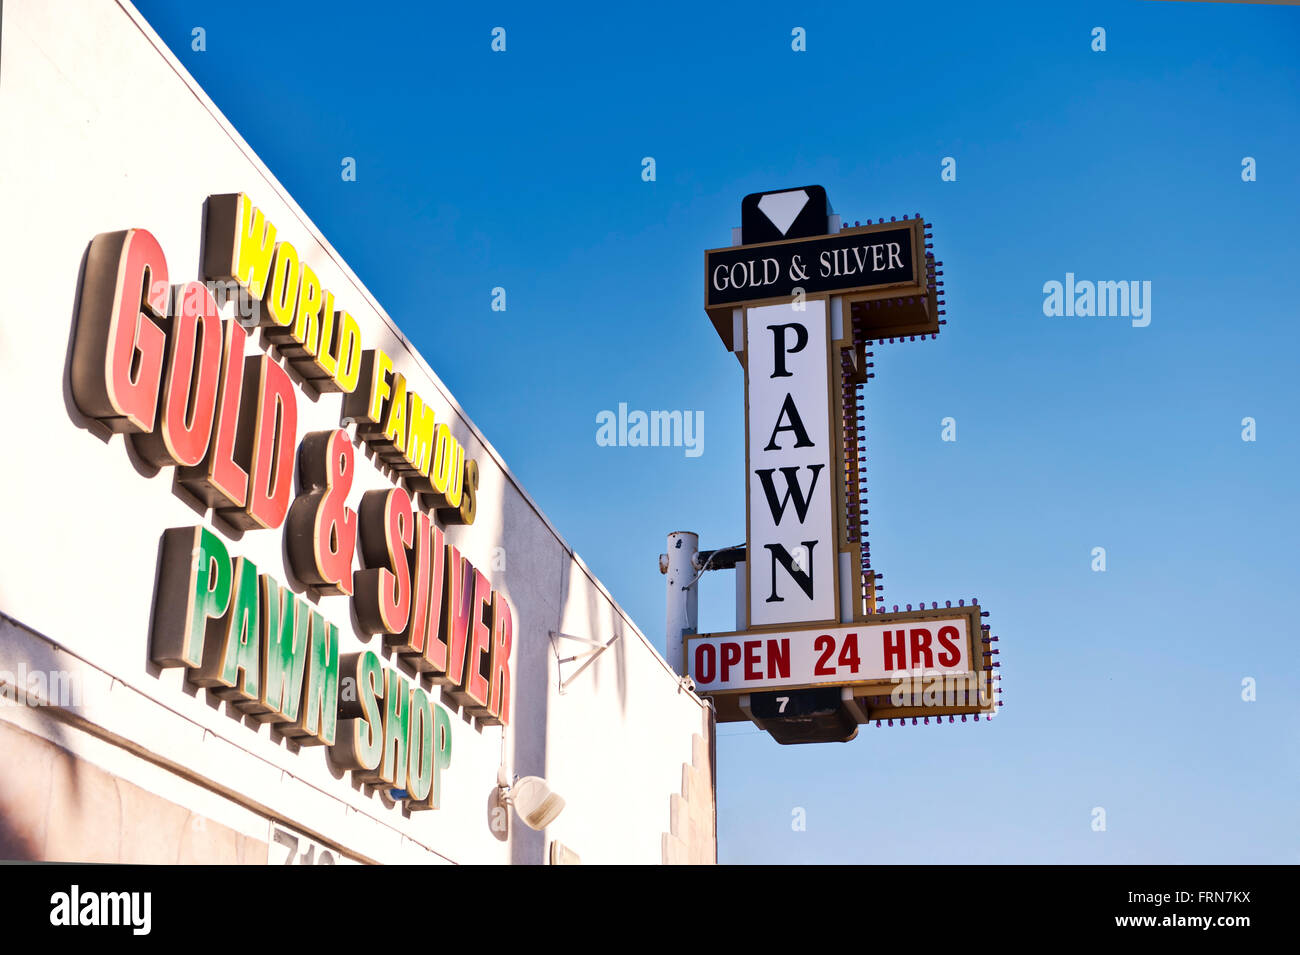 The Famous Pawnstars Pawn Stars 'Gold & Silver' Pawn Shop in Las Vegas, Nevada. Made famous by the cable TV History Channel Stock Photo